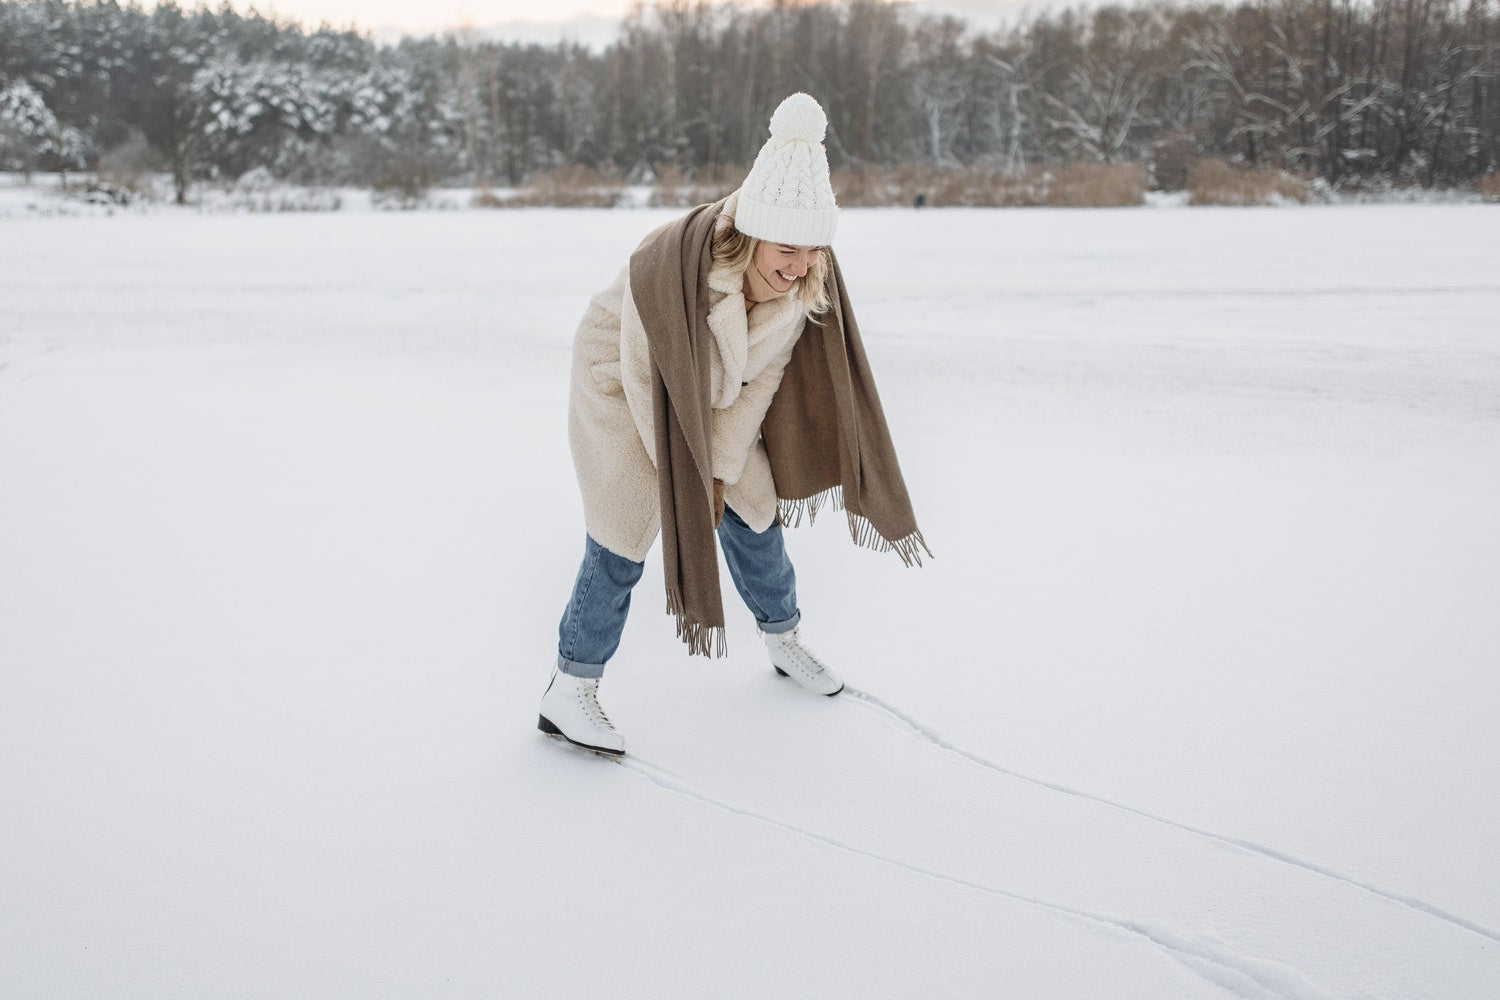 How To Ice Skate: Everything You Need To Know